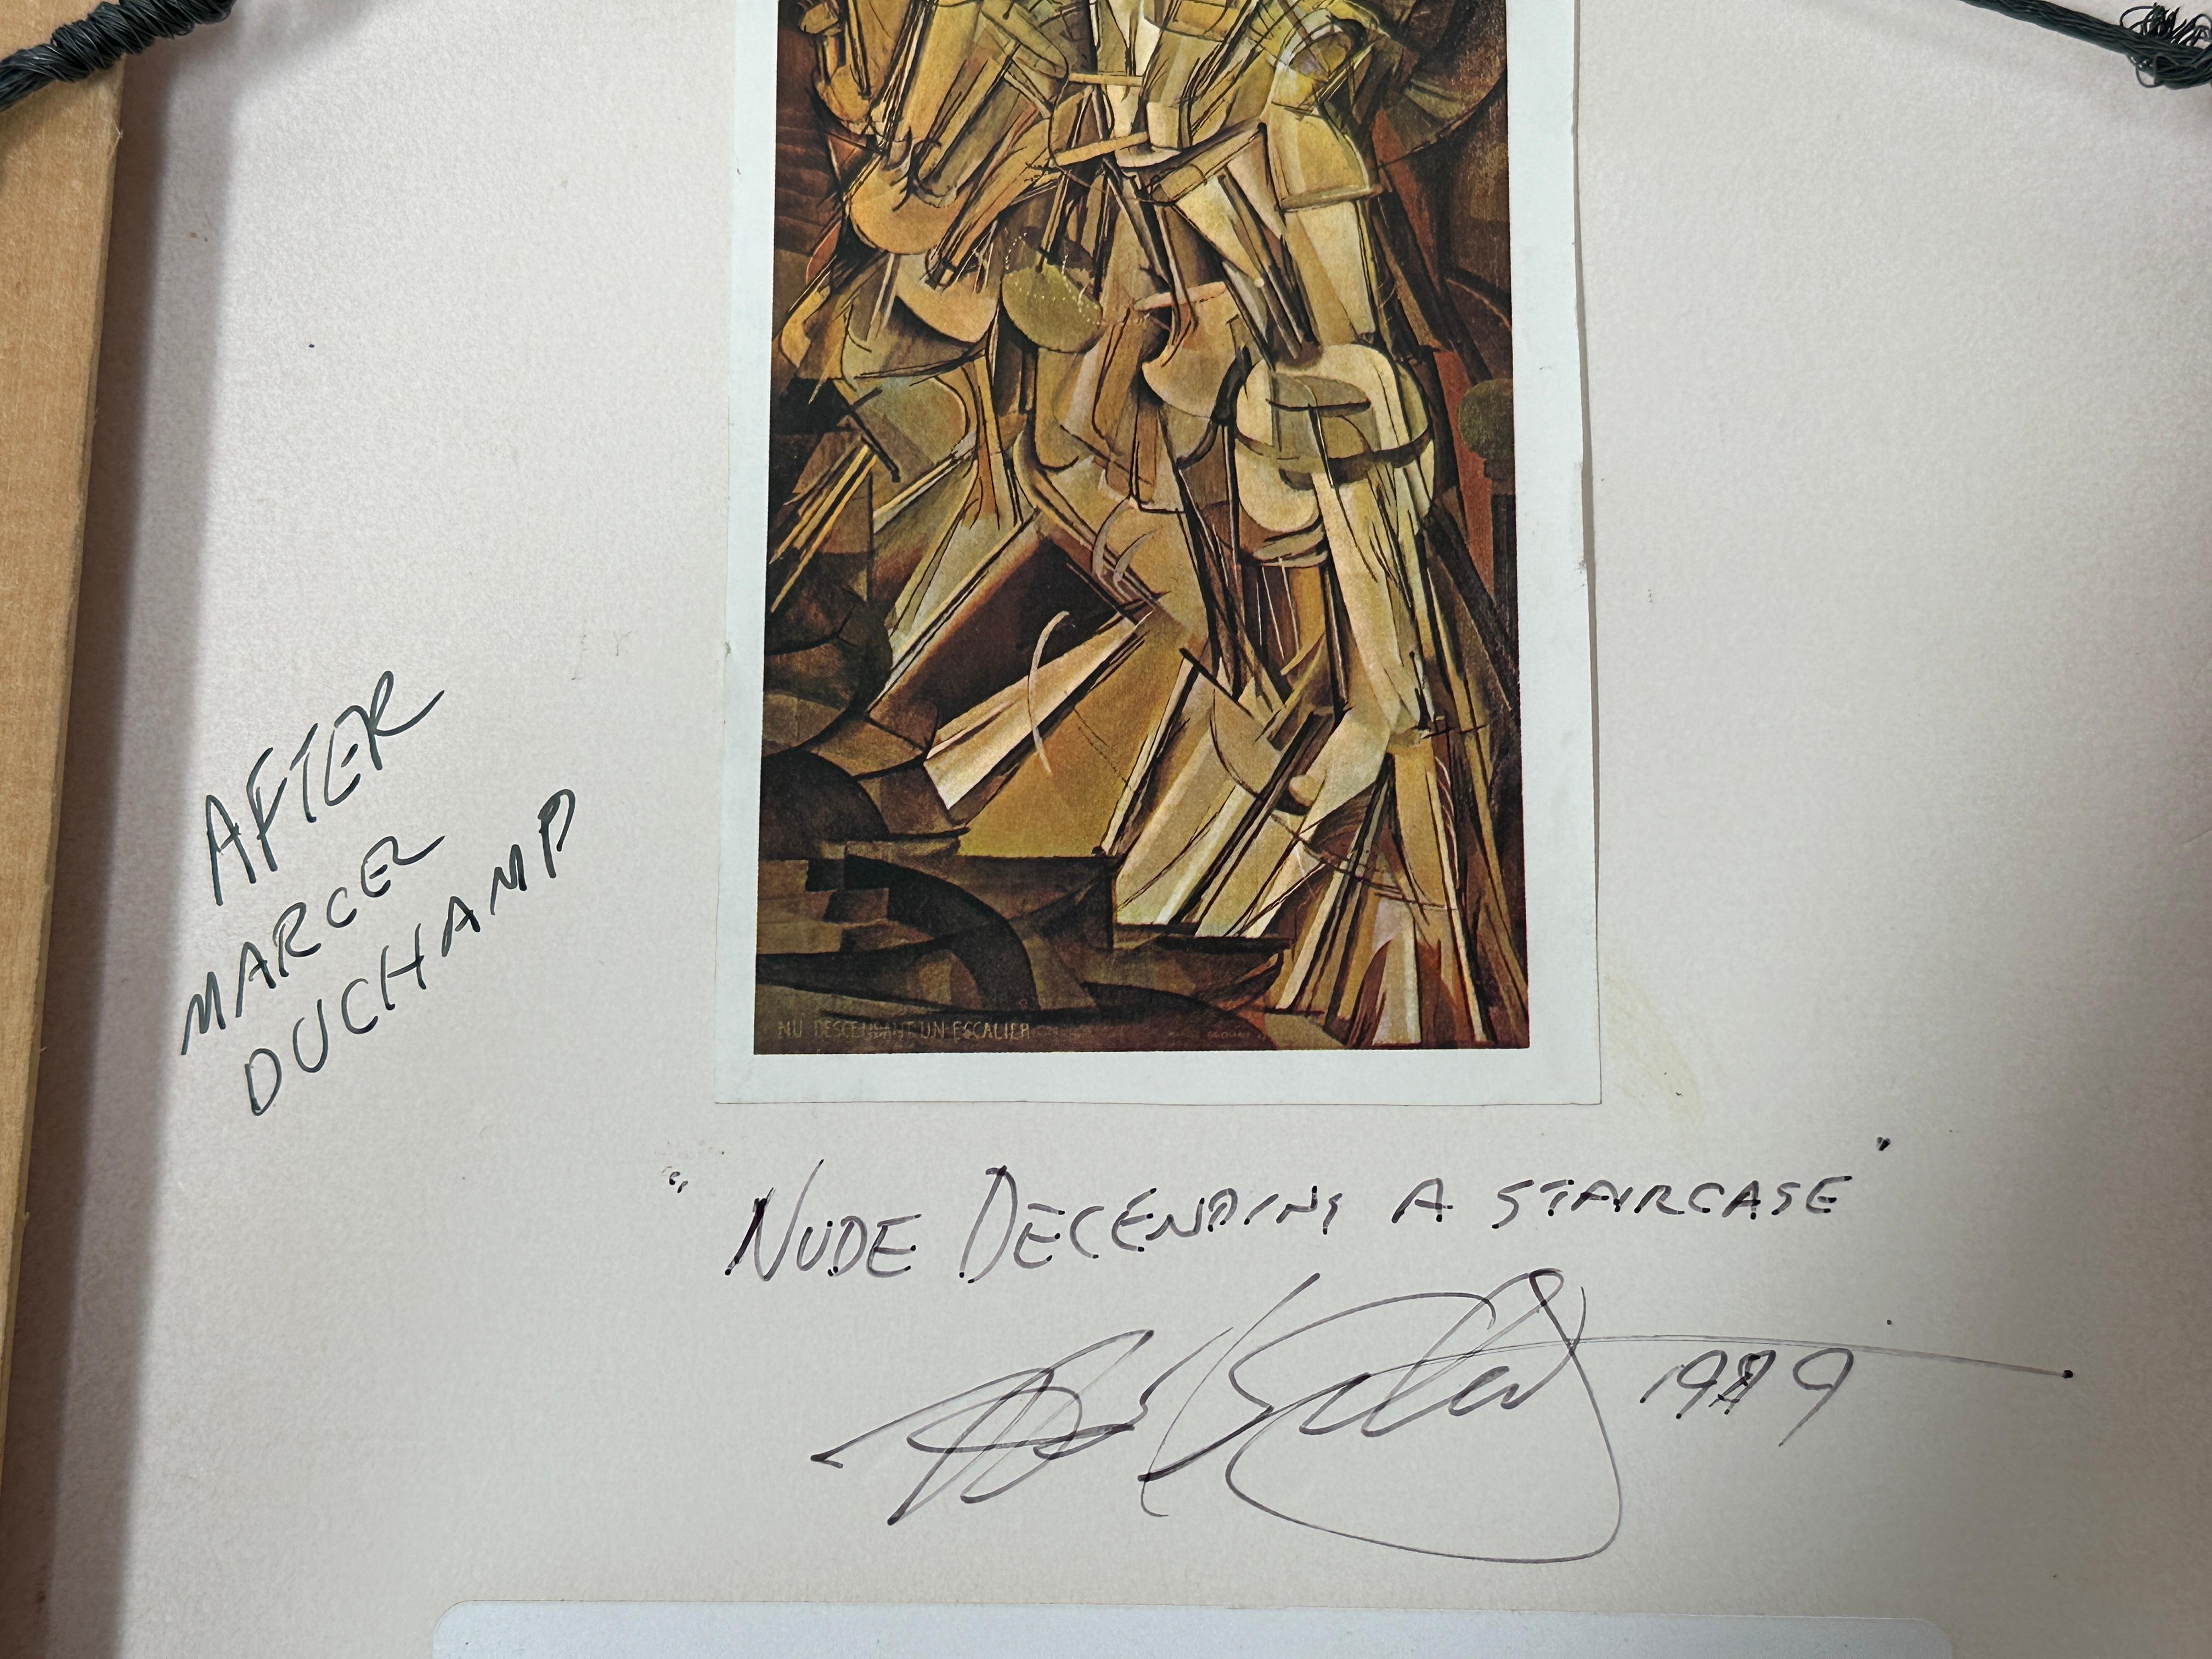 Oil, Wood and Straw Mixed Media signed N. Schultz after Marcel Duchamp For Sale 6